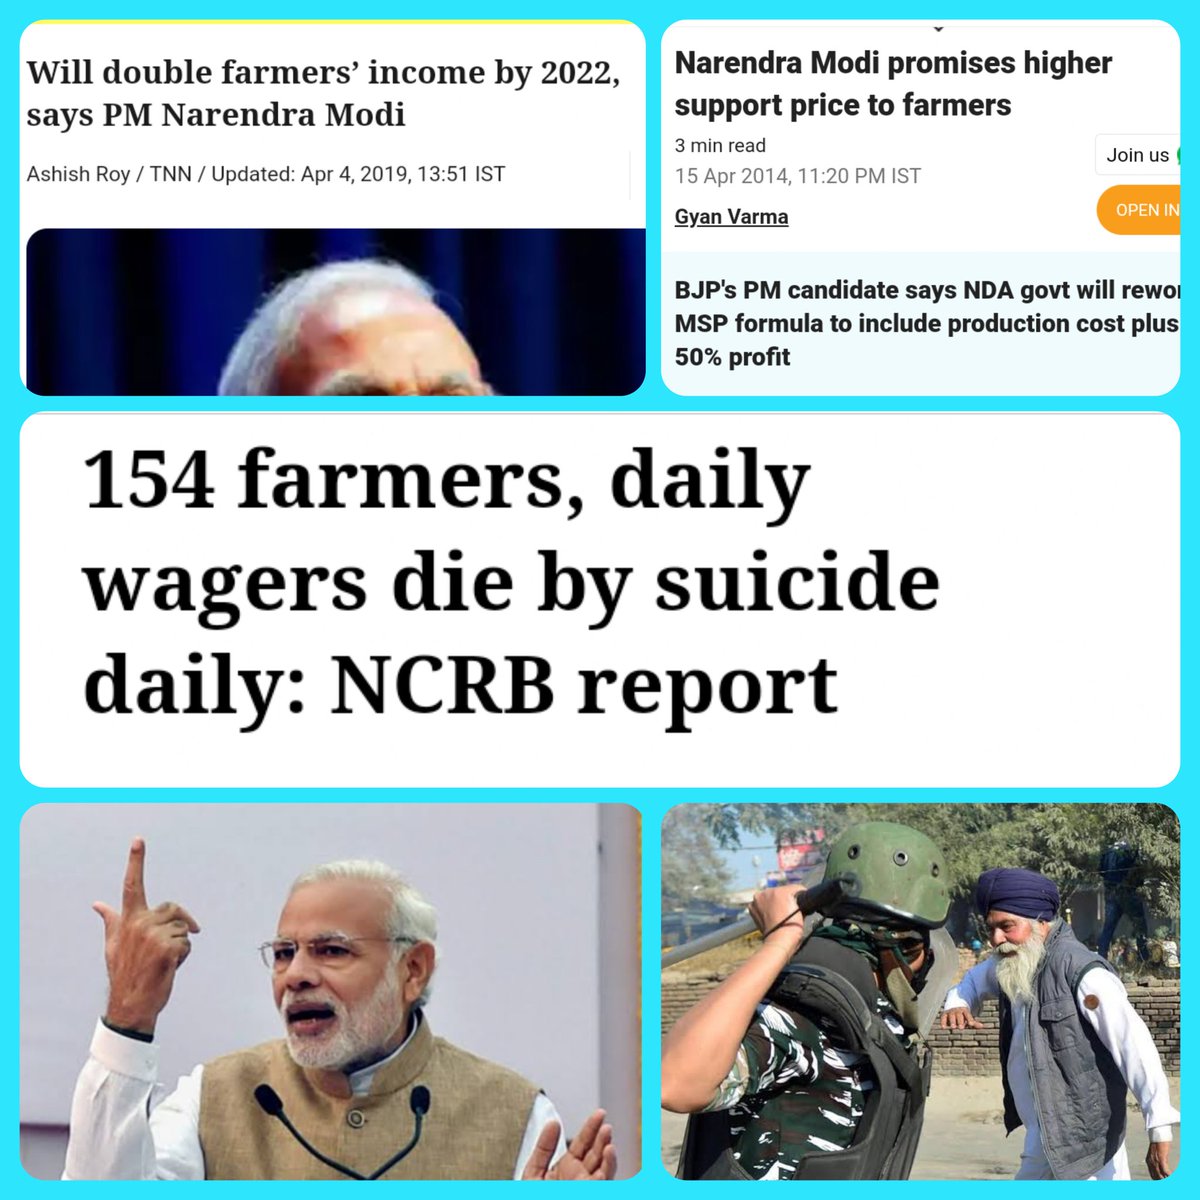 Wish You All National Farmers Day

With #ModiKiGuarantee 
- Double Farmers Income ❓
- Higher Support Price ❓
- Lathicharge to Farmers (Received)
- 154 Farmers, Daily Wagers Suicide Daily (Received)

#NationalFarmersDay #KisanDiwas #kisandivas #BrijBhushanSharanSingh